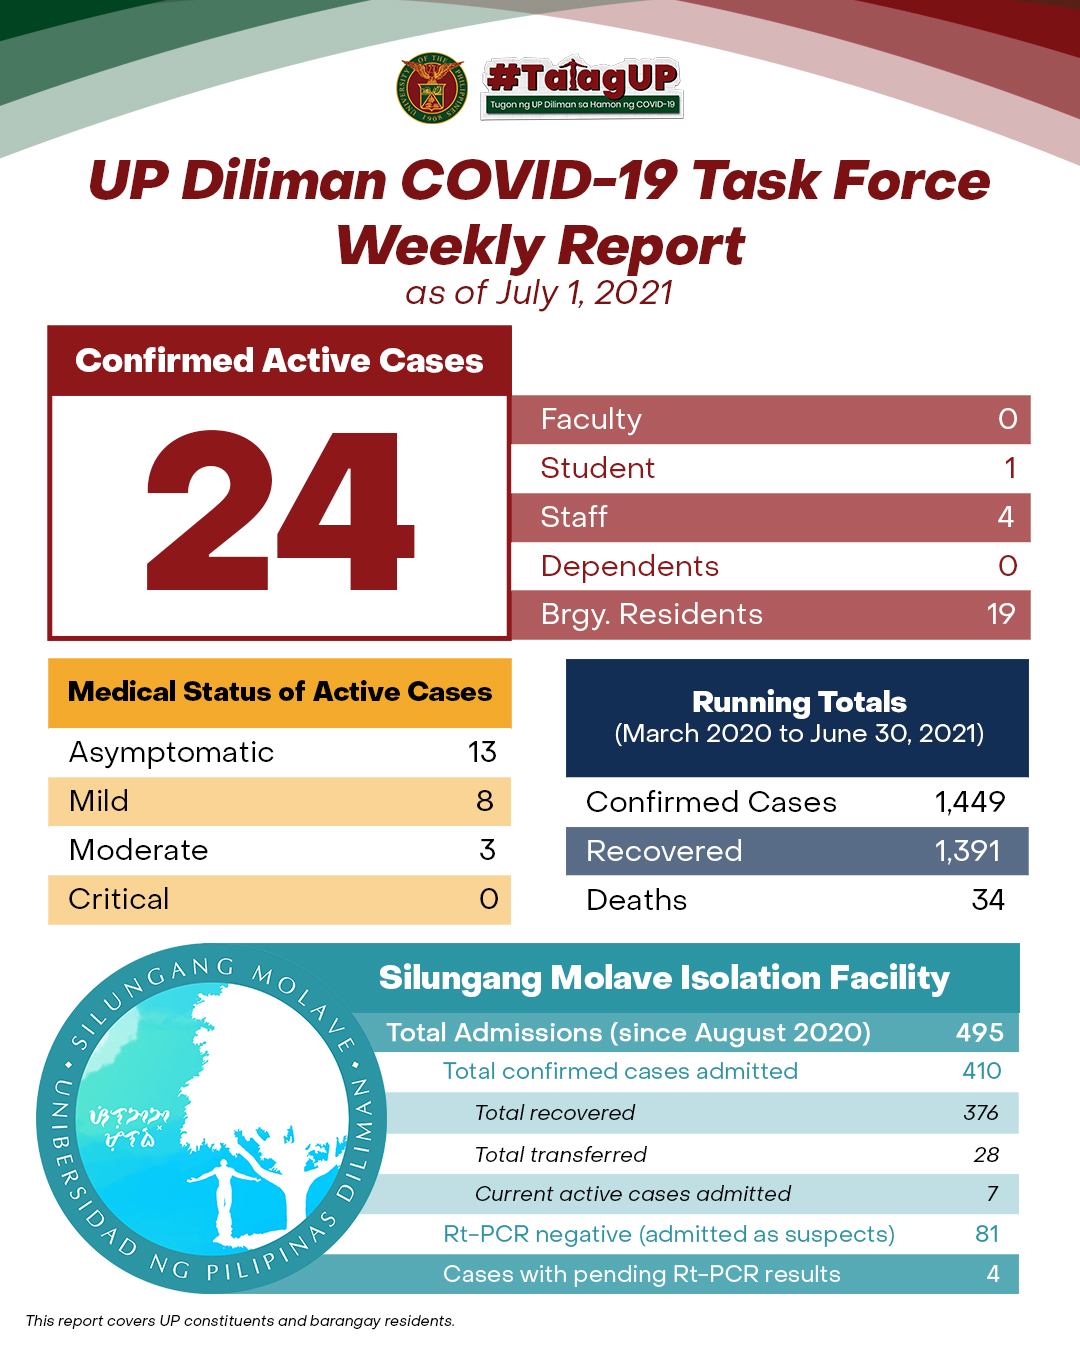 UP Diliman COVID-19 Task Force Weekly Report as of July 1, 2021